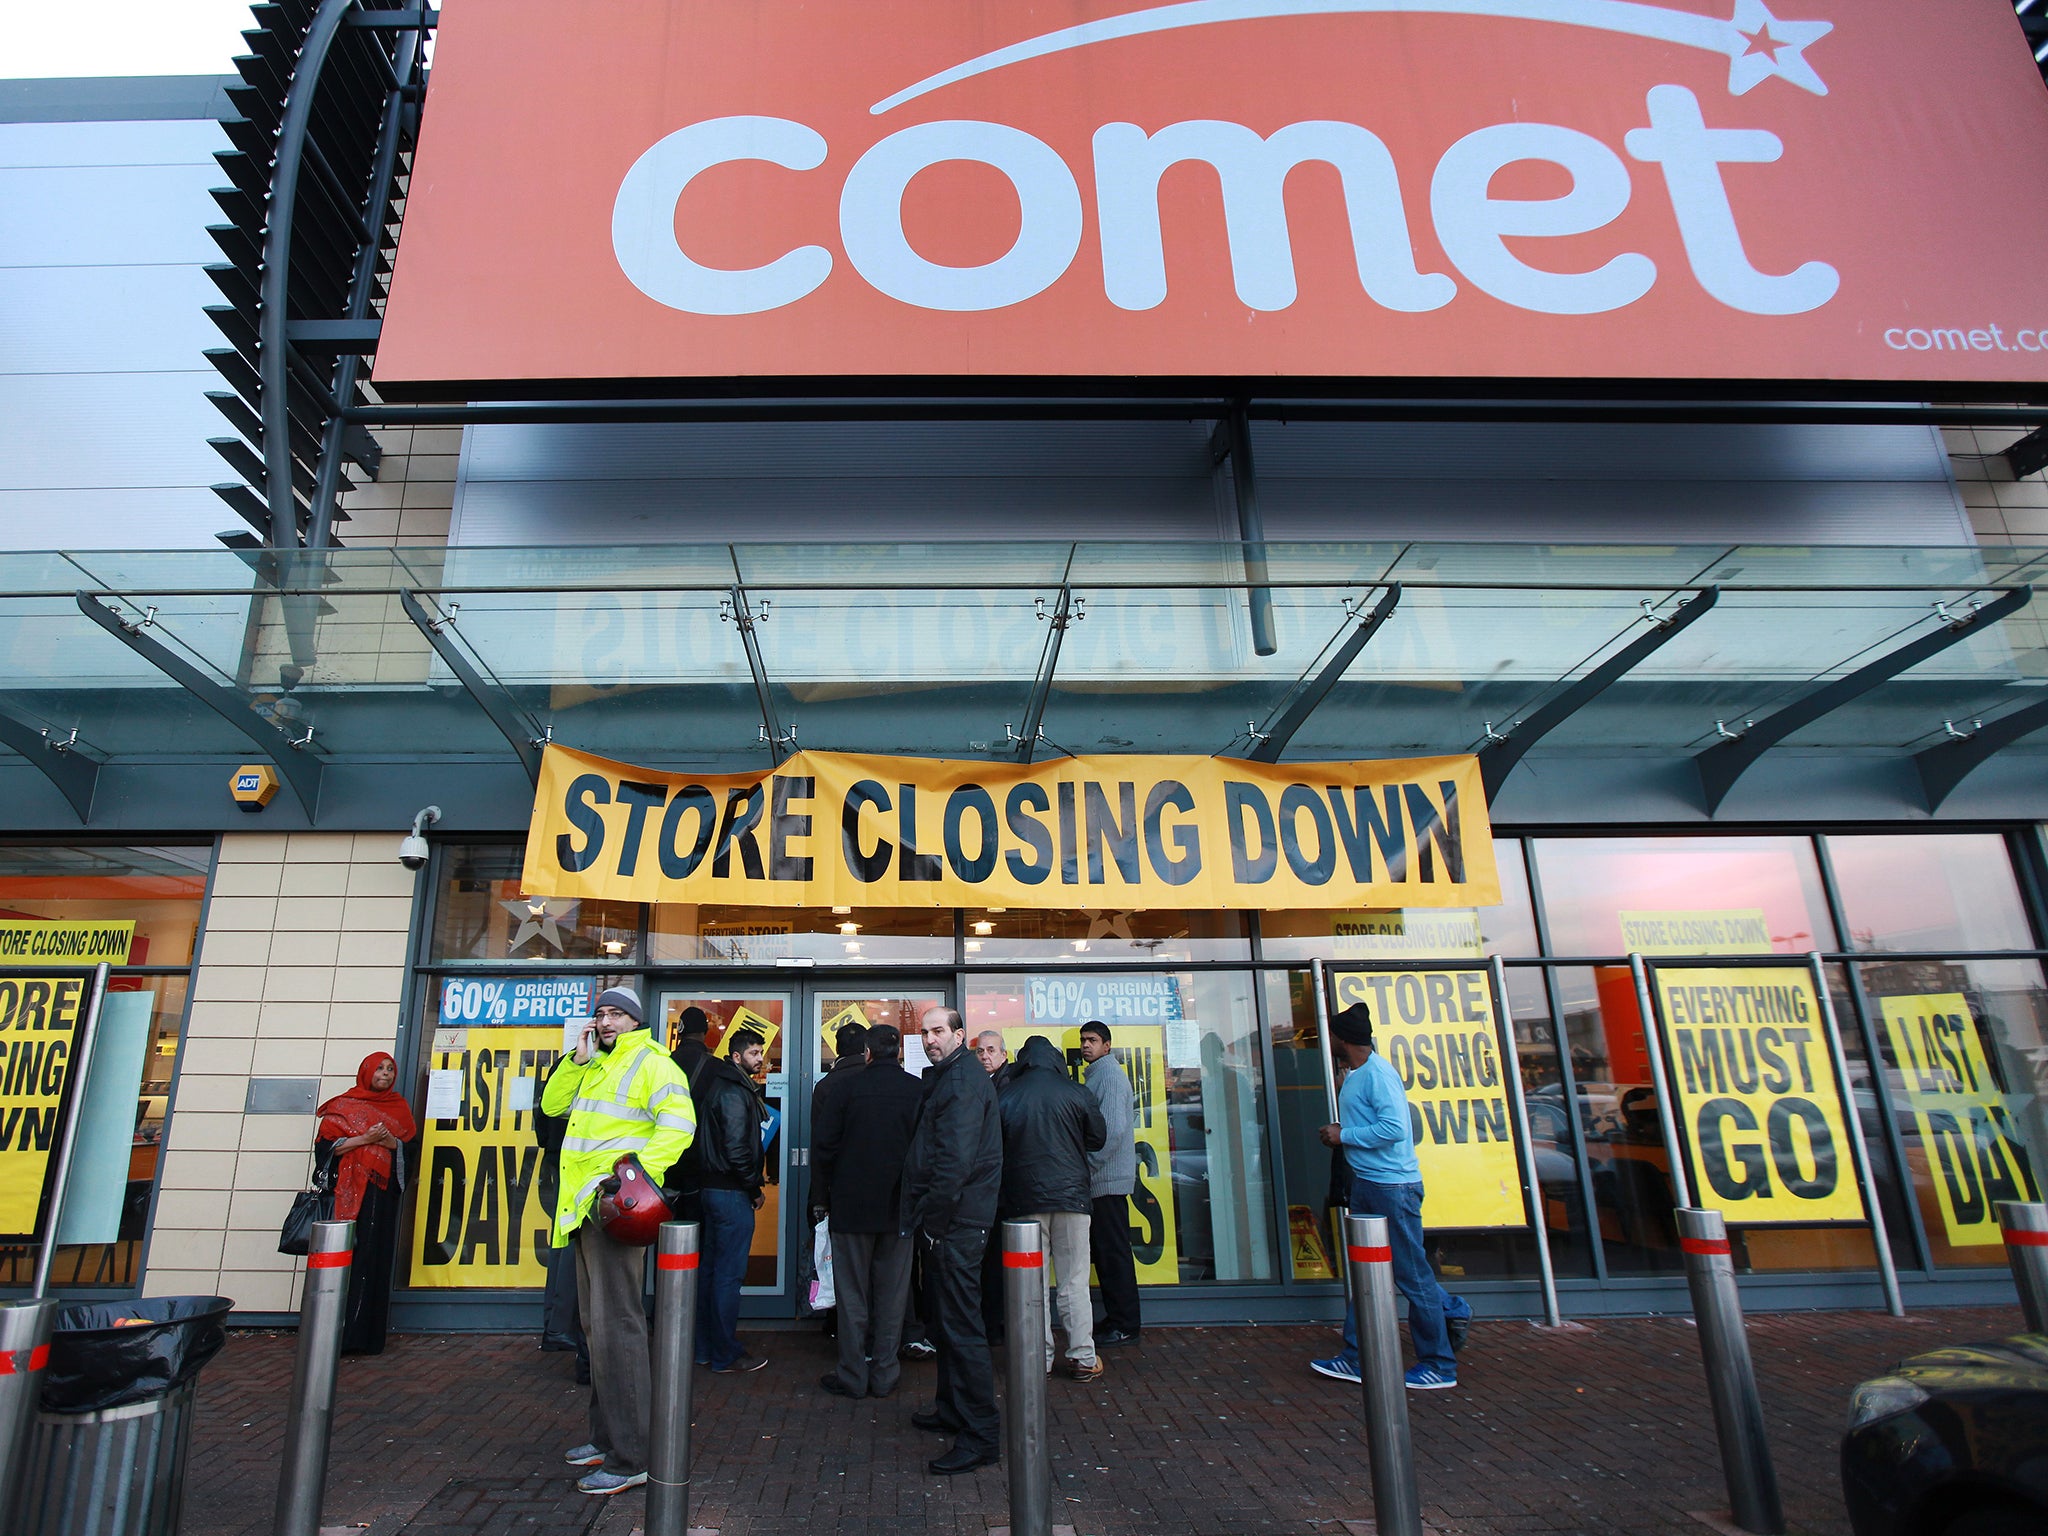 The collapse of Comet left 7,000 workers redundant and the taxpayer £70m out of pocket